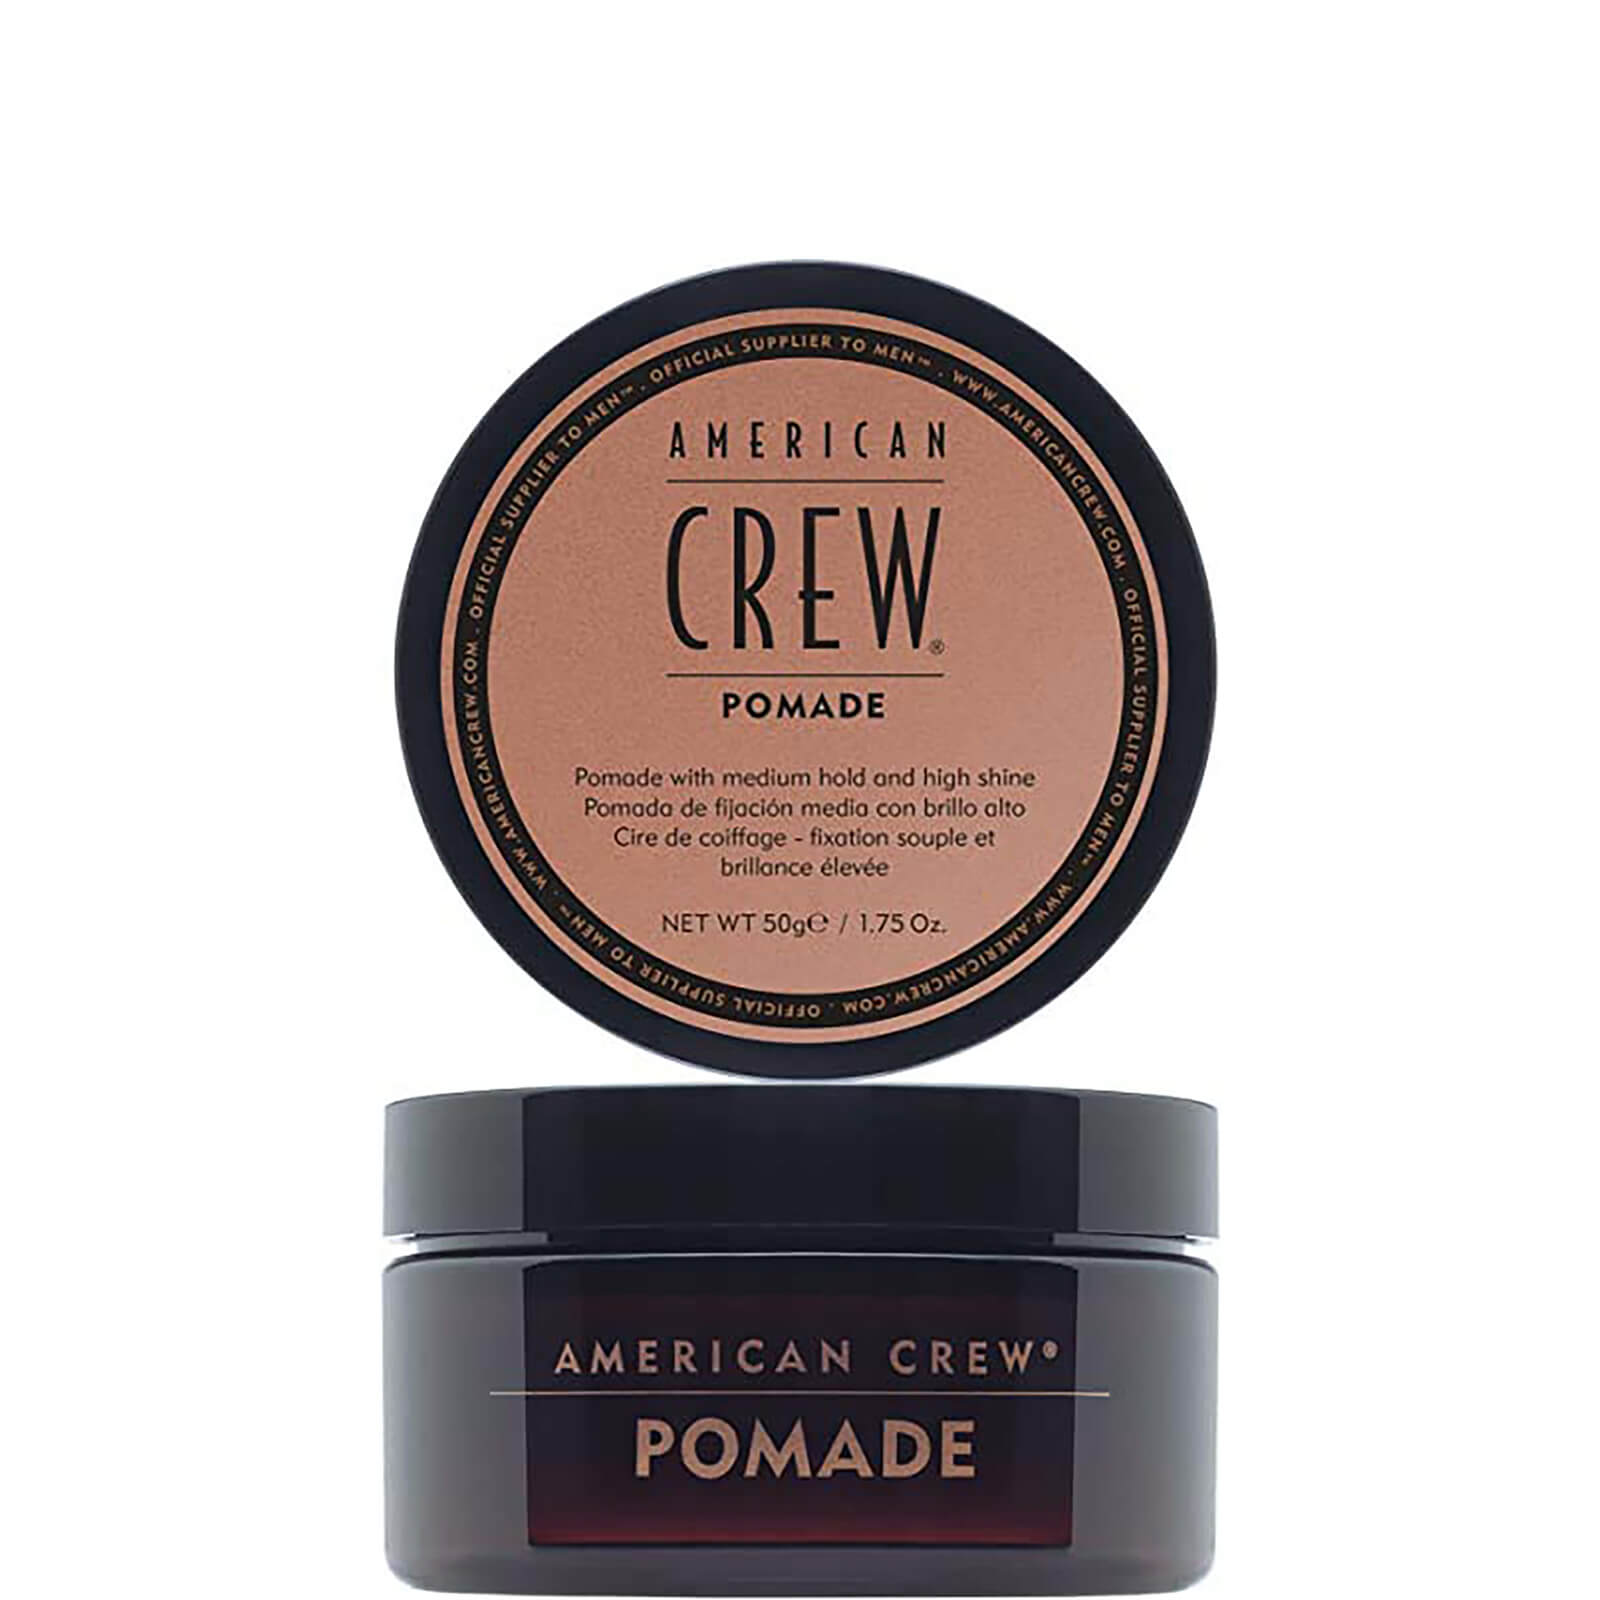 Photos - Hair Styling Product American Crew Pomade 50g 7238732000 